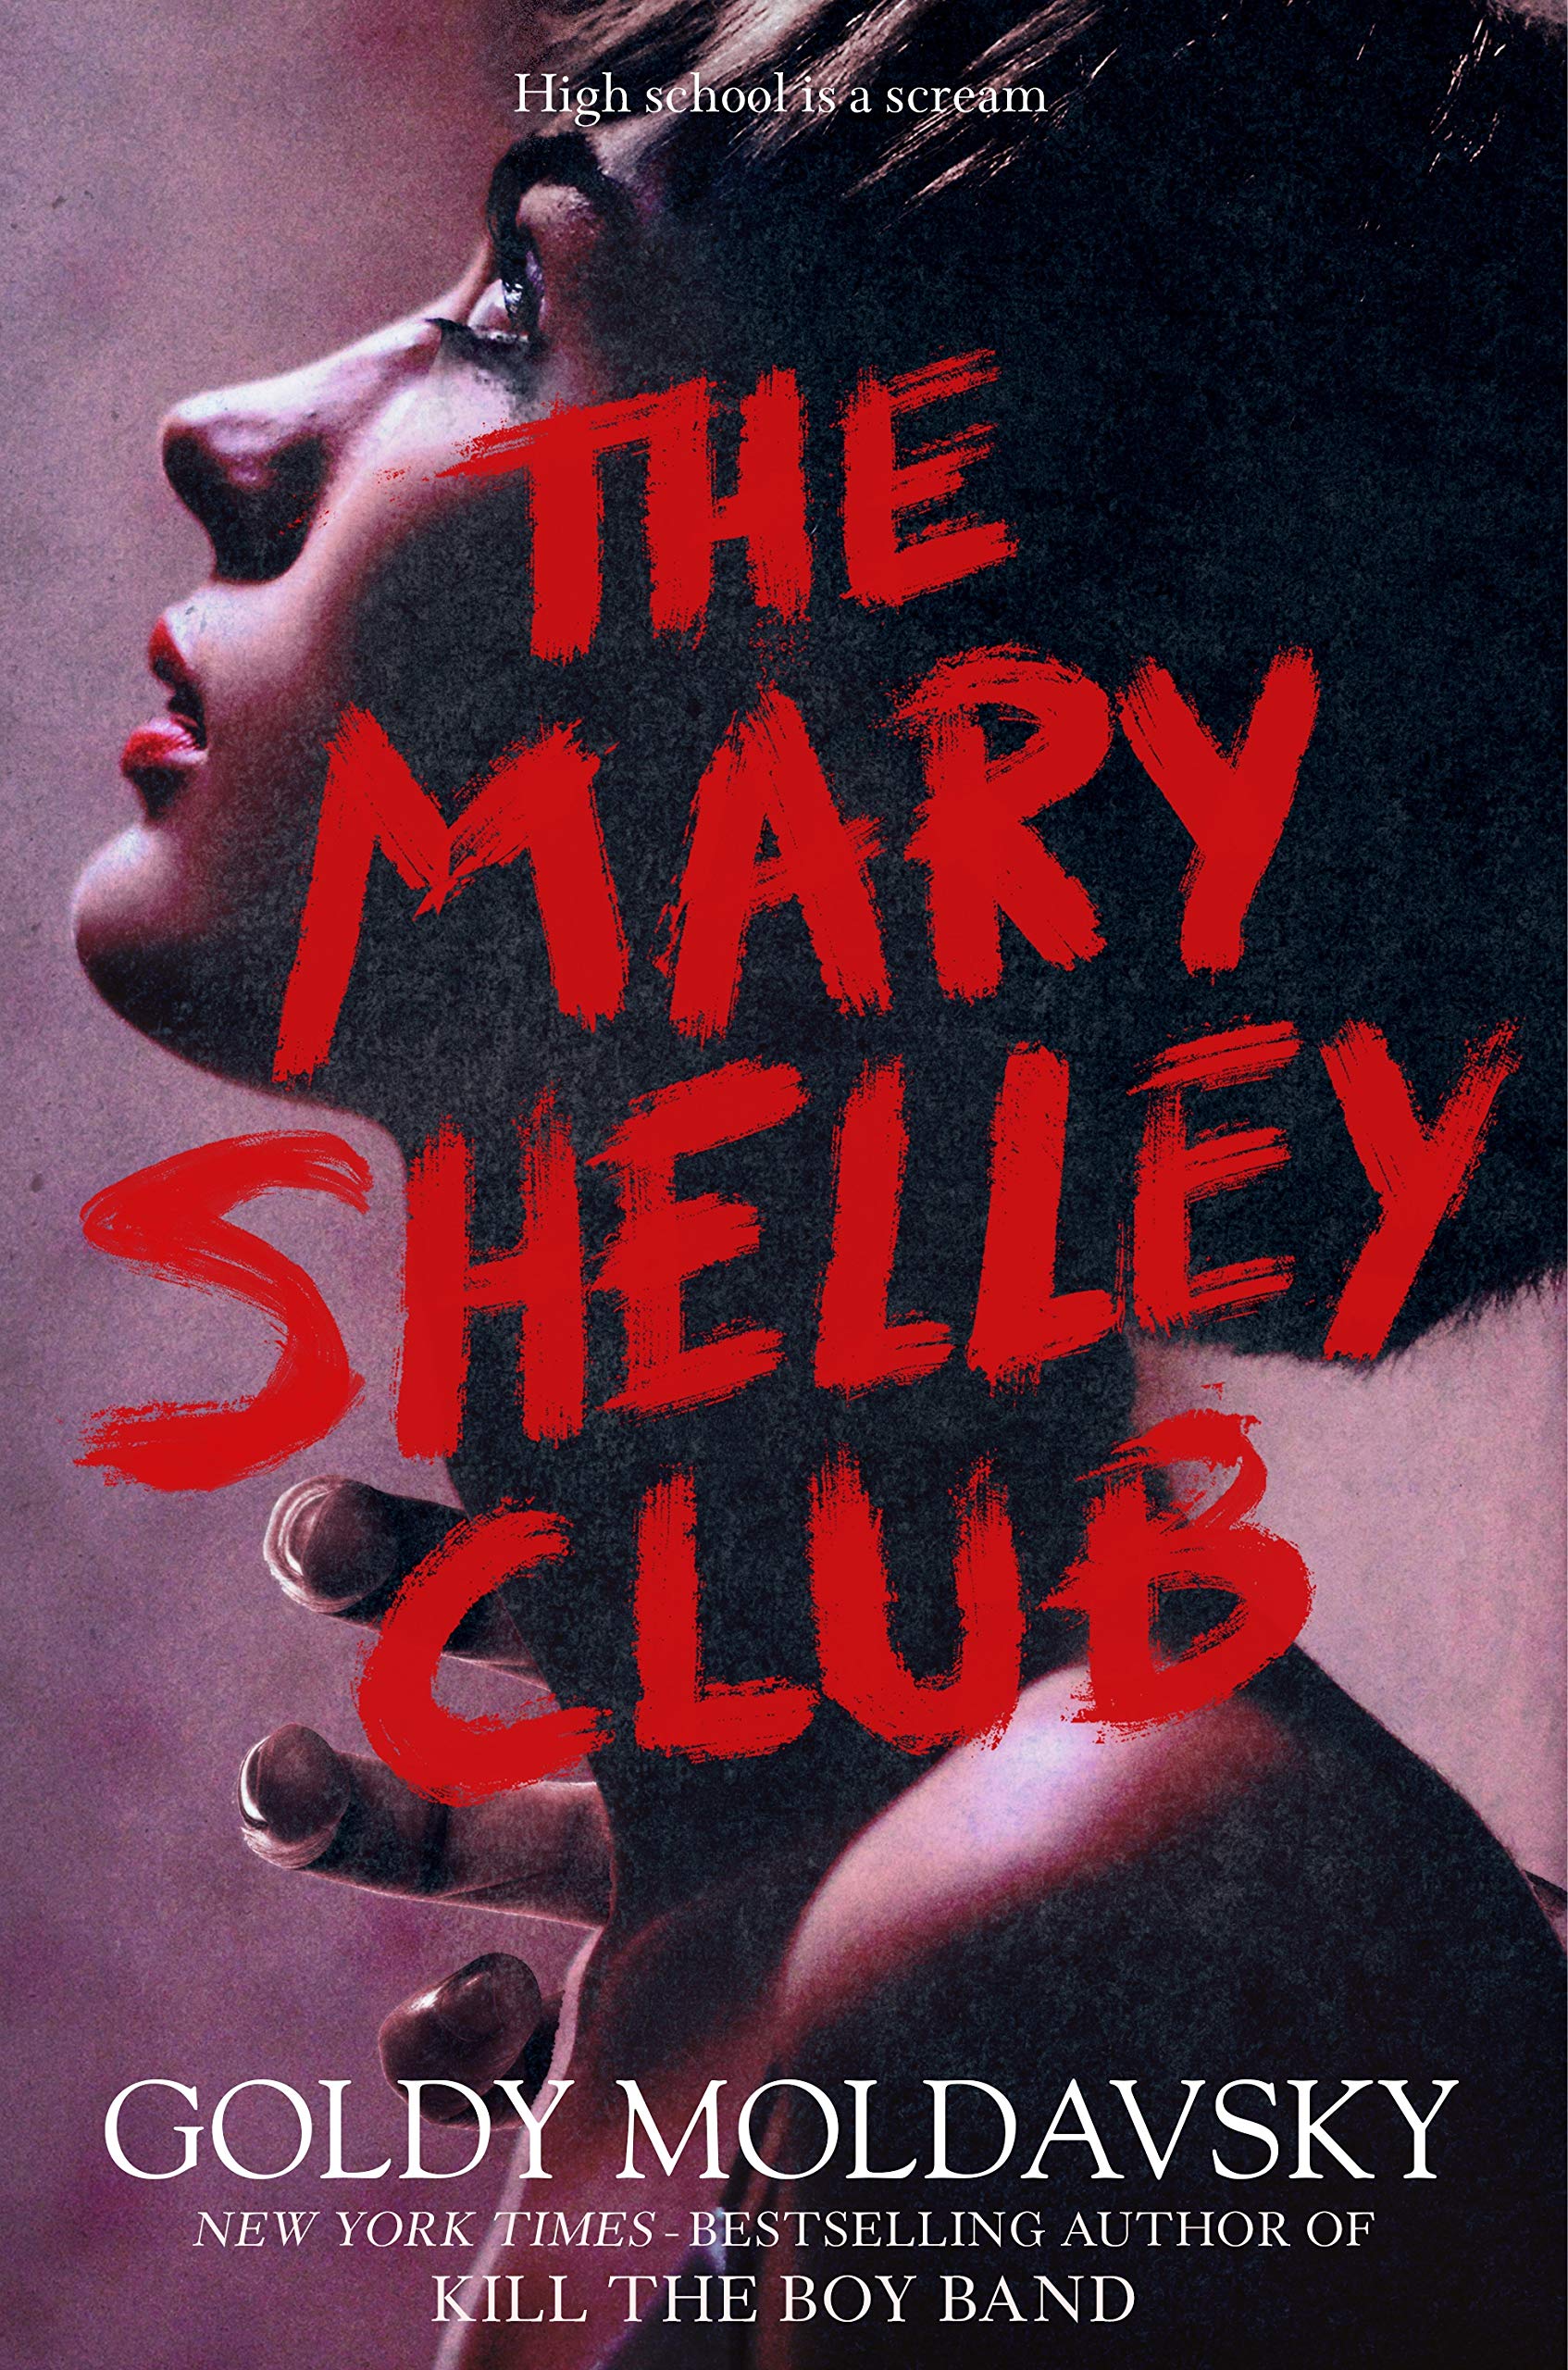 image for "mary shelley club"